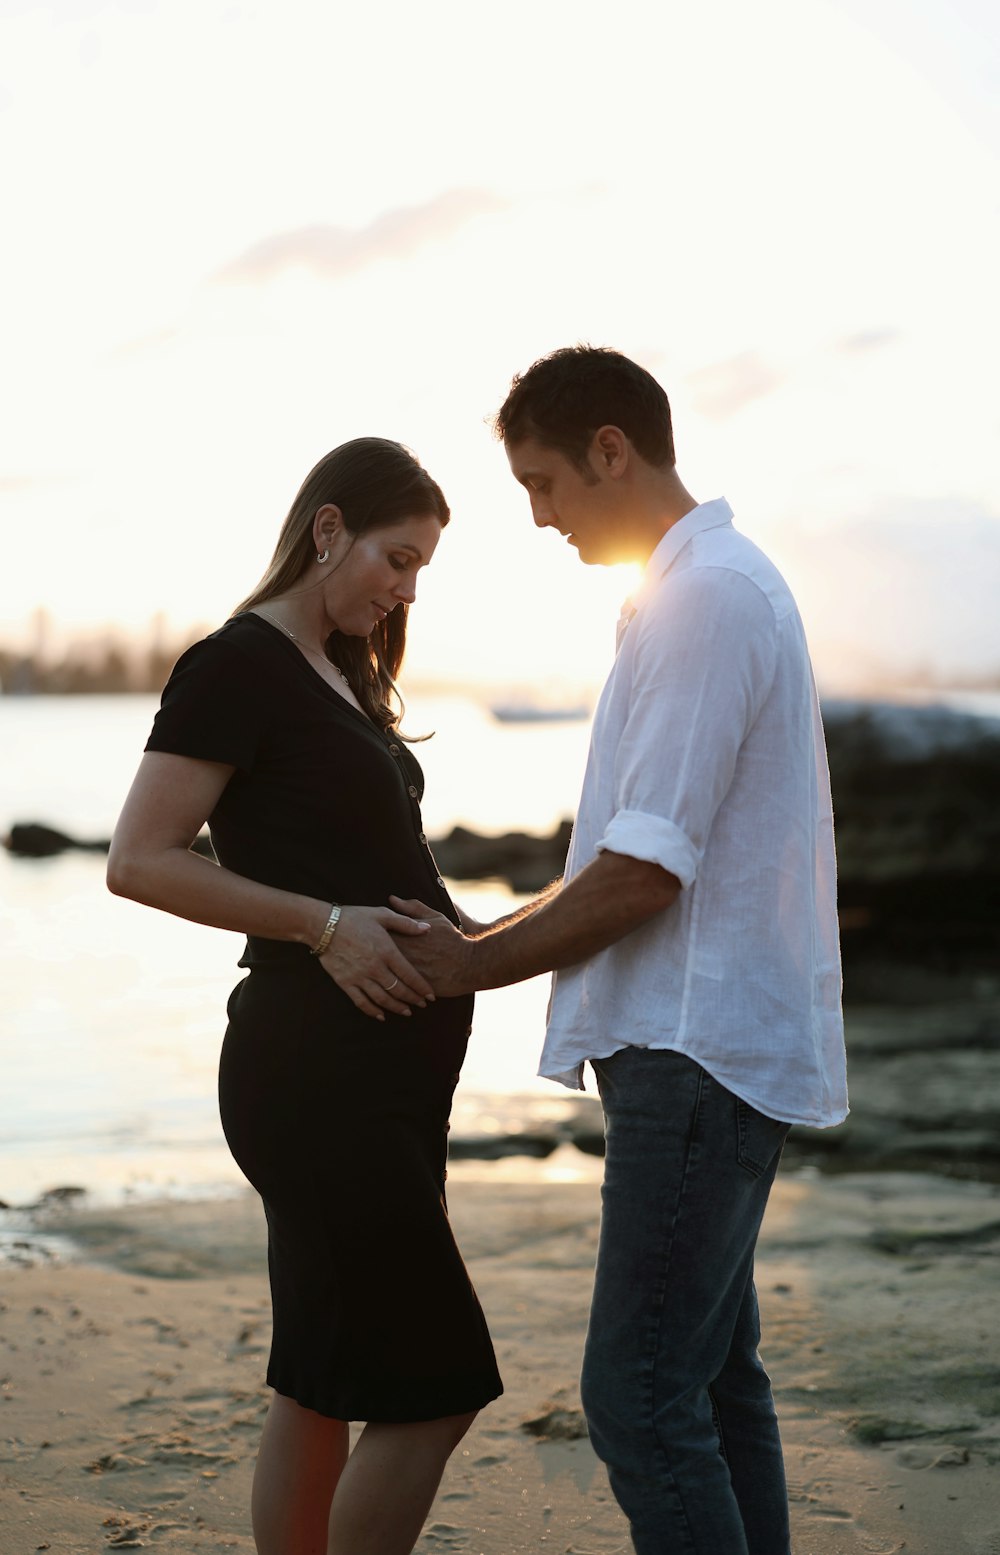 a pregnant woman standing next to a man on a beach